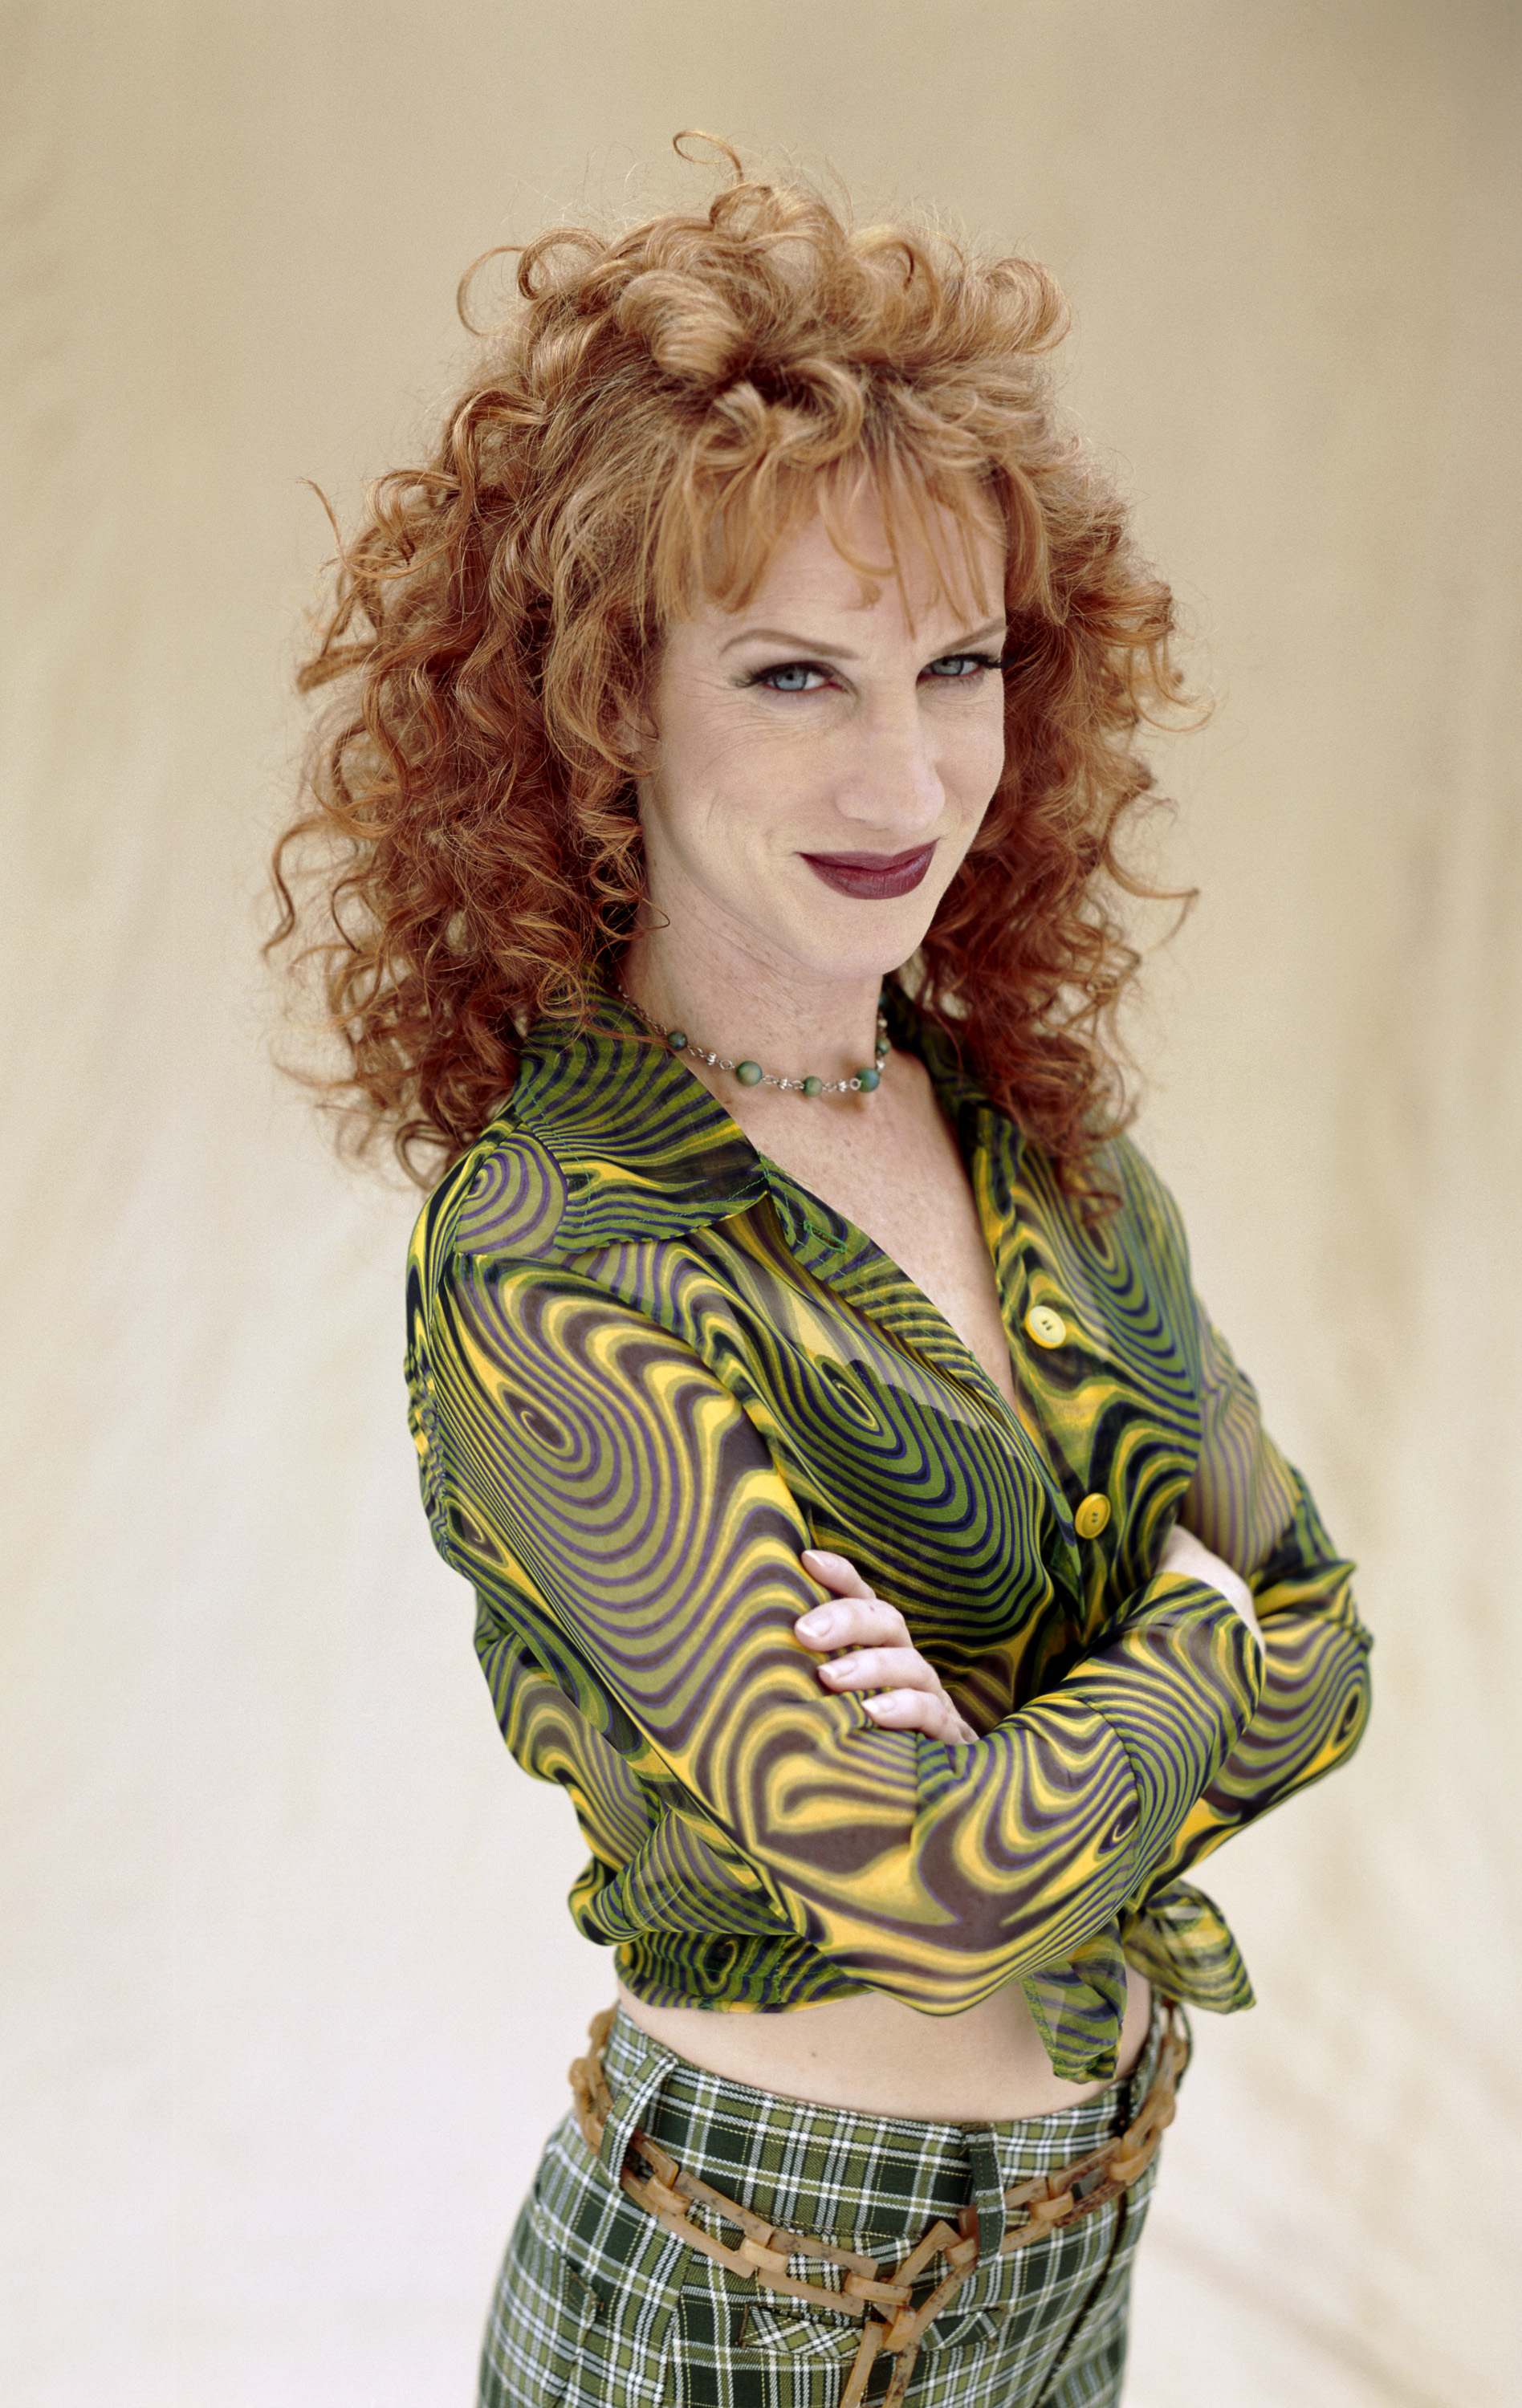 Kathy Griffin vers 1997. | Source : Getty Images